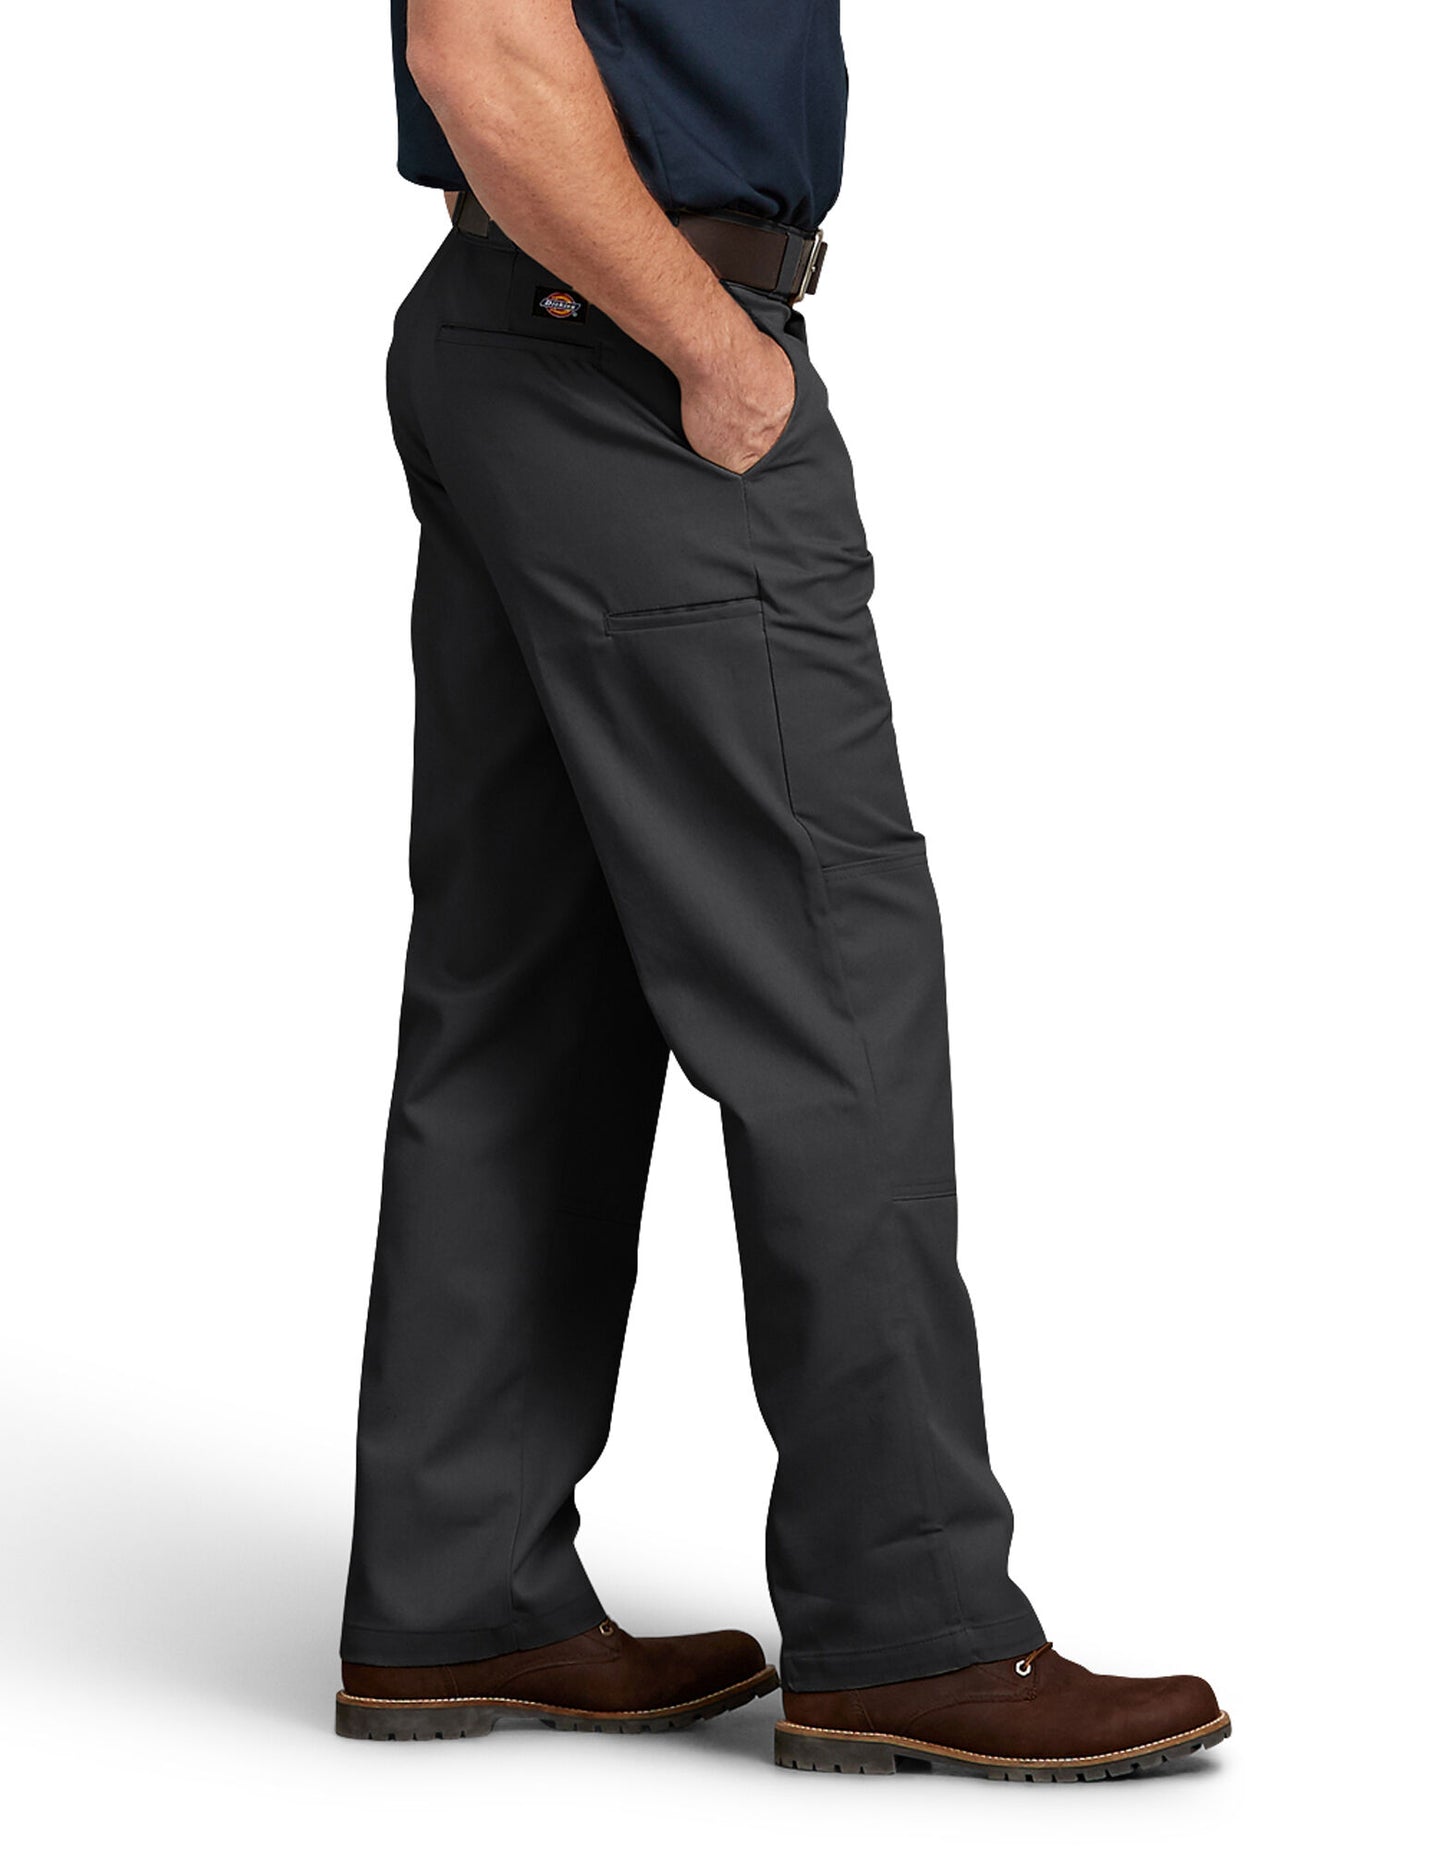 FLEX Relaxed Fit Straight Leg Double Knee Work Pants